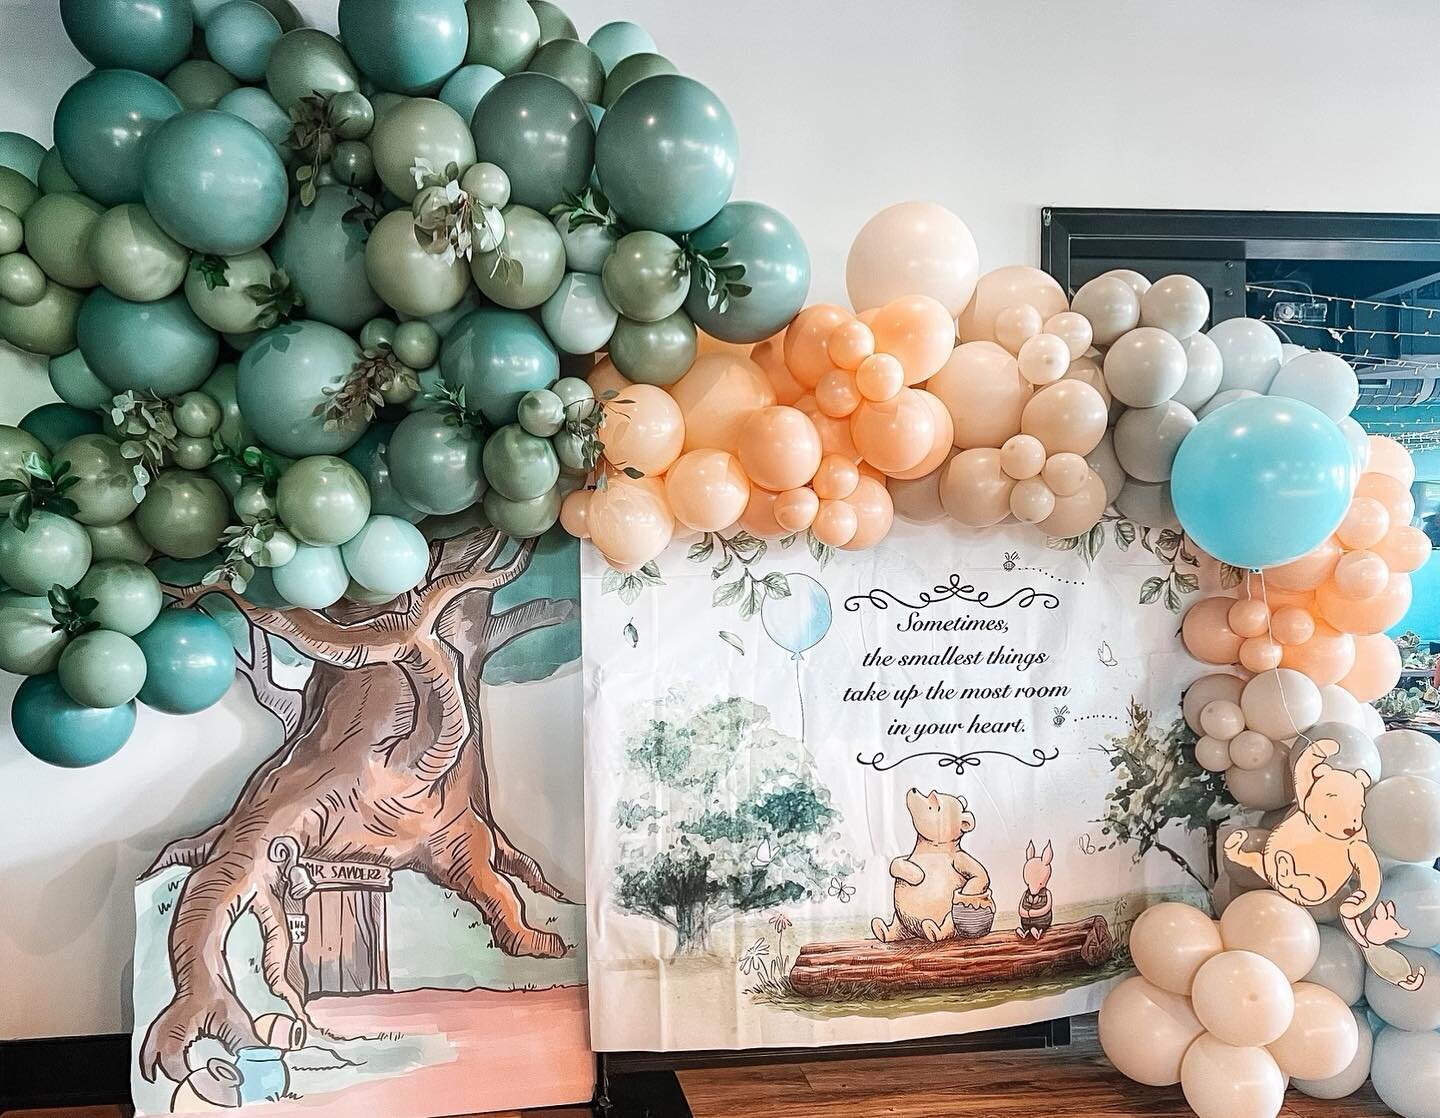 Sometimes the smallest things take up the most room in your heart 🤍. That Winnie the Pooh sure was right ✨
Event Styling: @looselydrapeddesigns 
Tree Cutout Rental: @kiokreations 
Balloons: @tweepartees 
Venue: @theelmlagrange